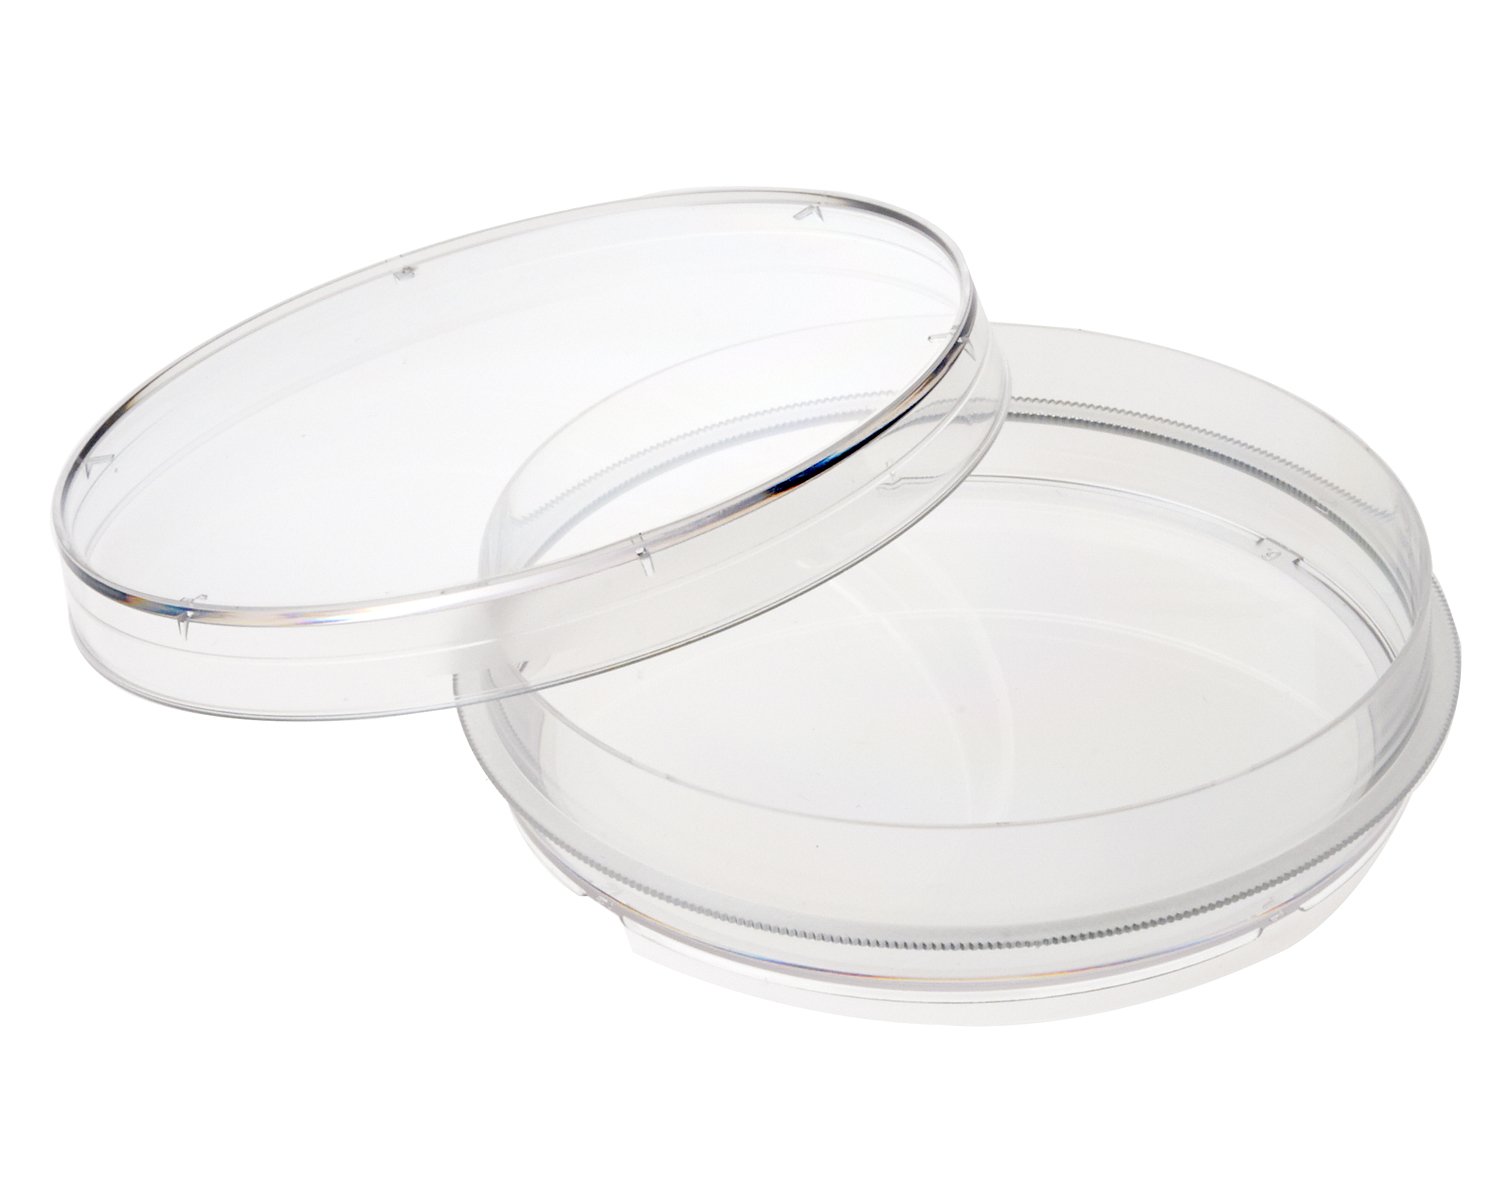 CELLTREAT 229620 100mm x 20mm Tissue Culture Treated Dish w/Grip Ring, Sterile (300/pk)